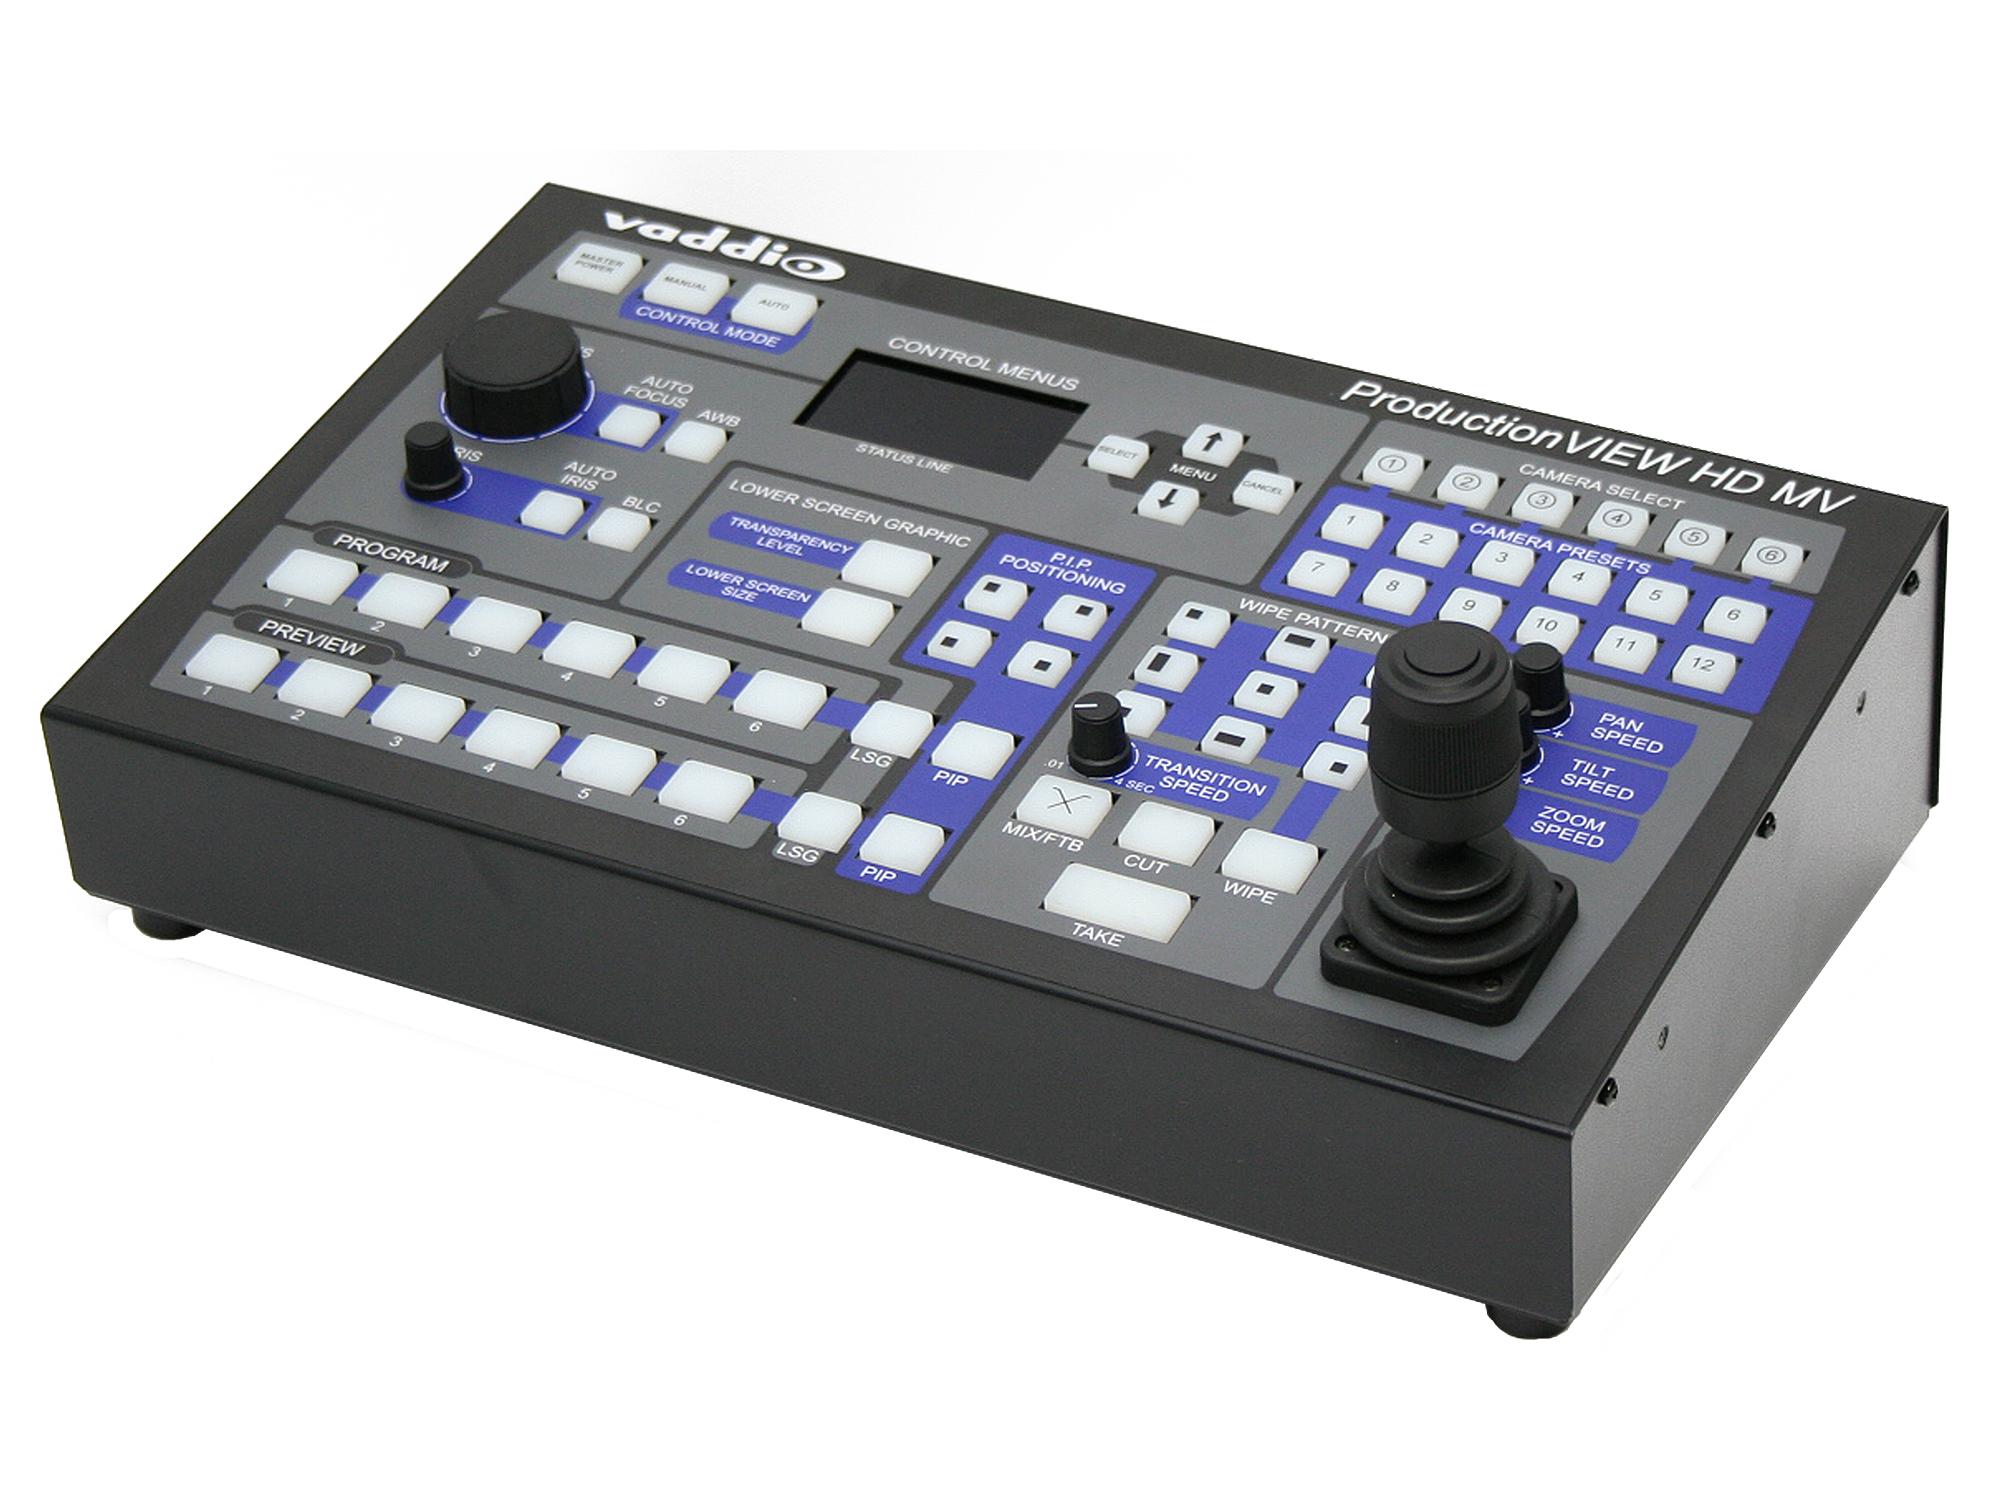 999-5625-000 ProductionVIEW HD/RGBHV/SD MV is a camera control console with multiviewer capabilities by Vaddio